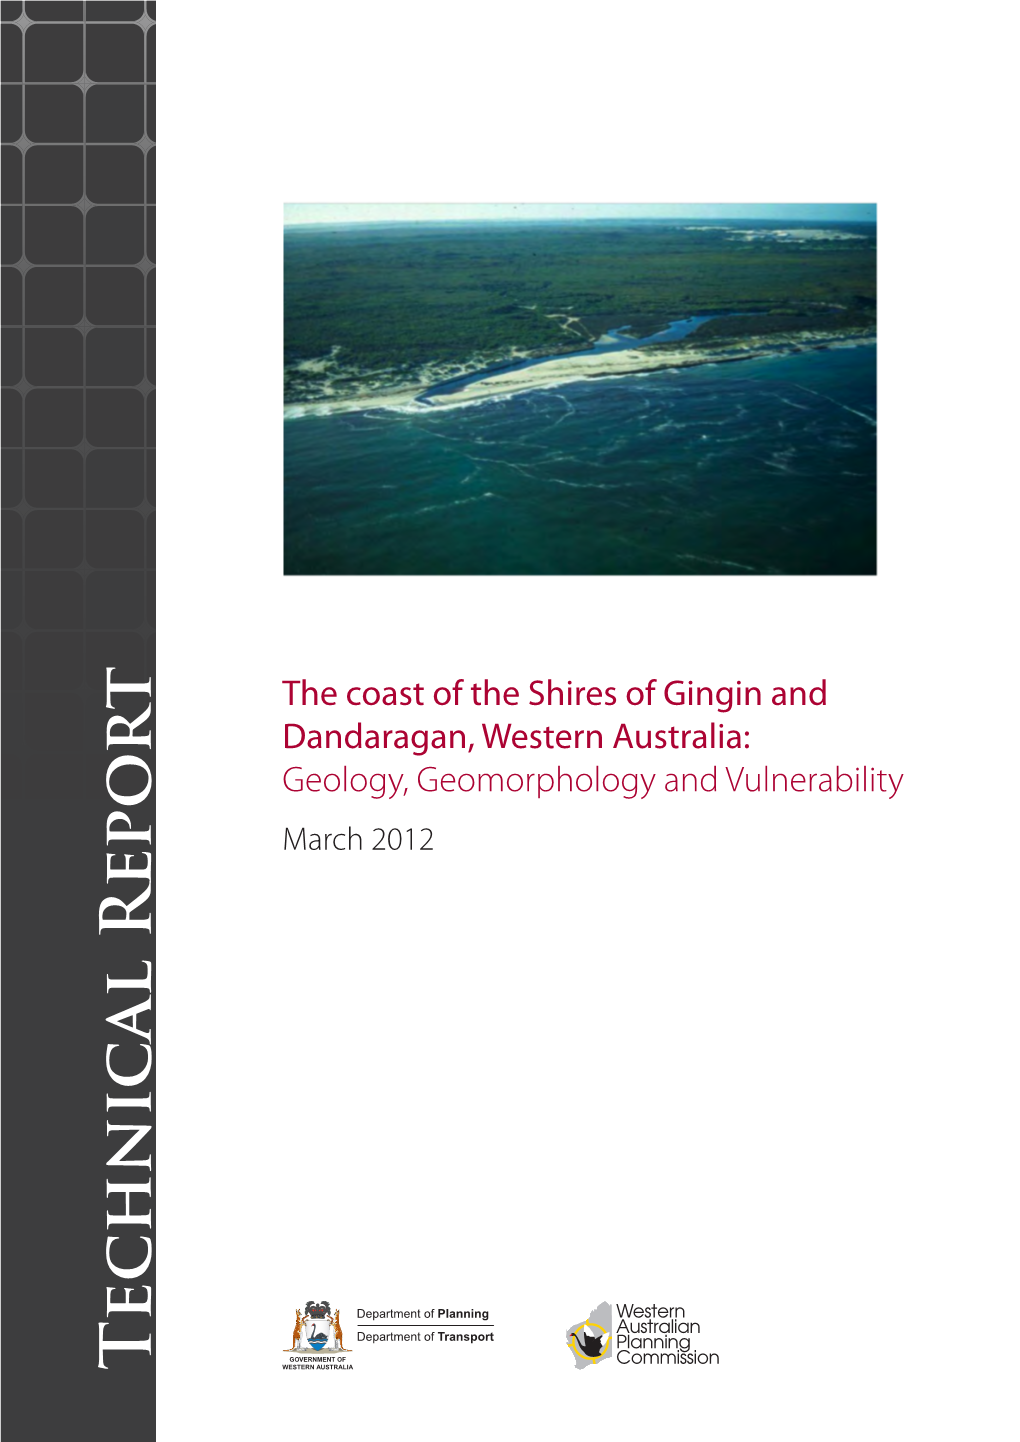 The Coast of the Shires of Gingin and Dandaragan, Western Australia: Geology, Geomorphology & Vulnerability